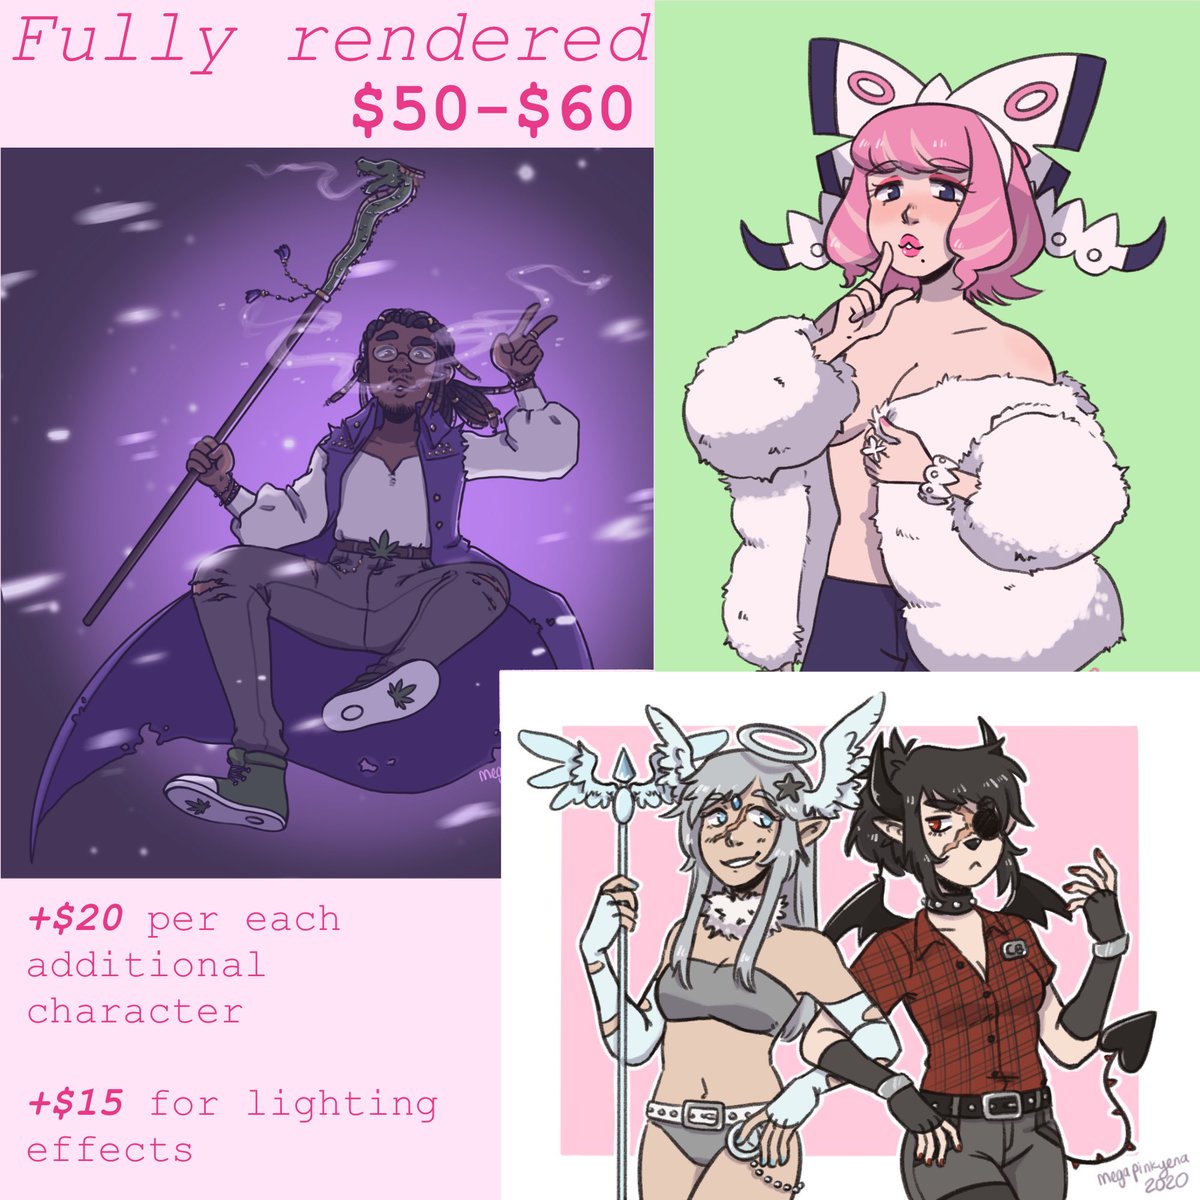 ‼️ COMMISSIONS OPEN PERMANENTLY‼️
I can show additional artwork samples if needed.
DM or email me if you are interested. :)

Email: megapinkyena@gmail.com
Instagram: megapinkyena
Patreon: MegaPinkyena 